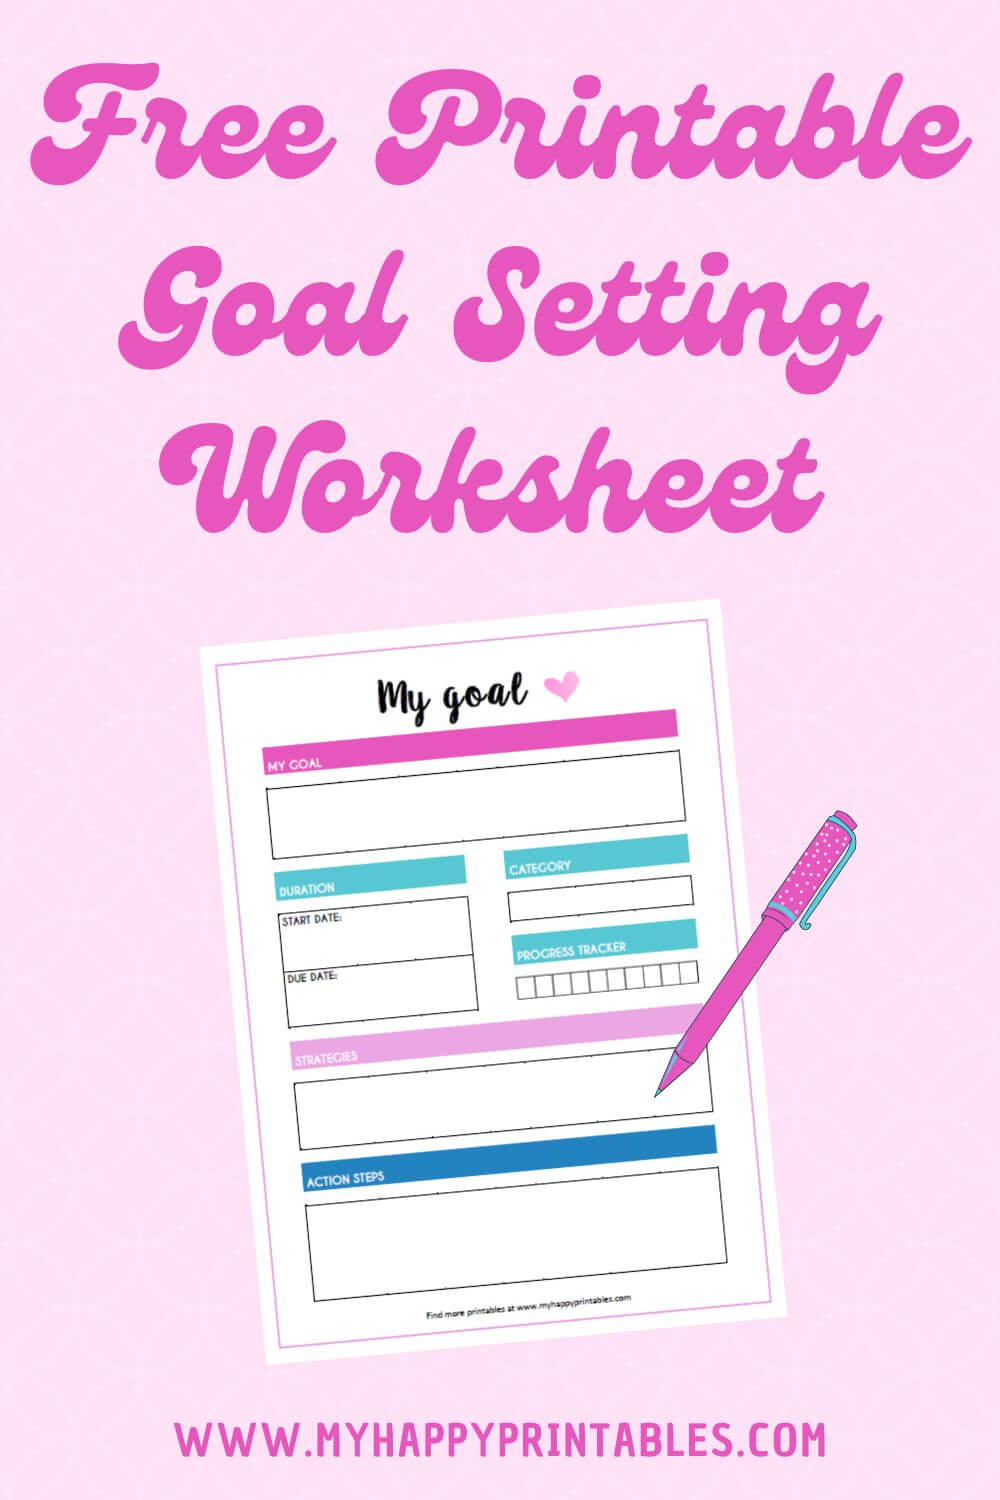 How to set goals - Free Printable Goal Setting Worksheet 1 - My Happy ...